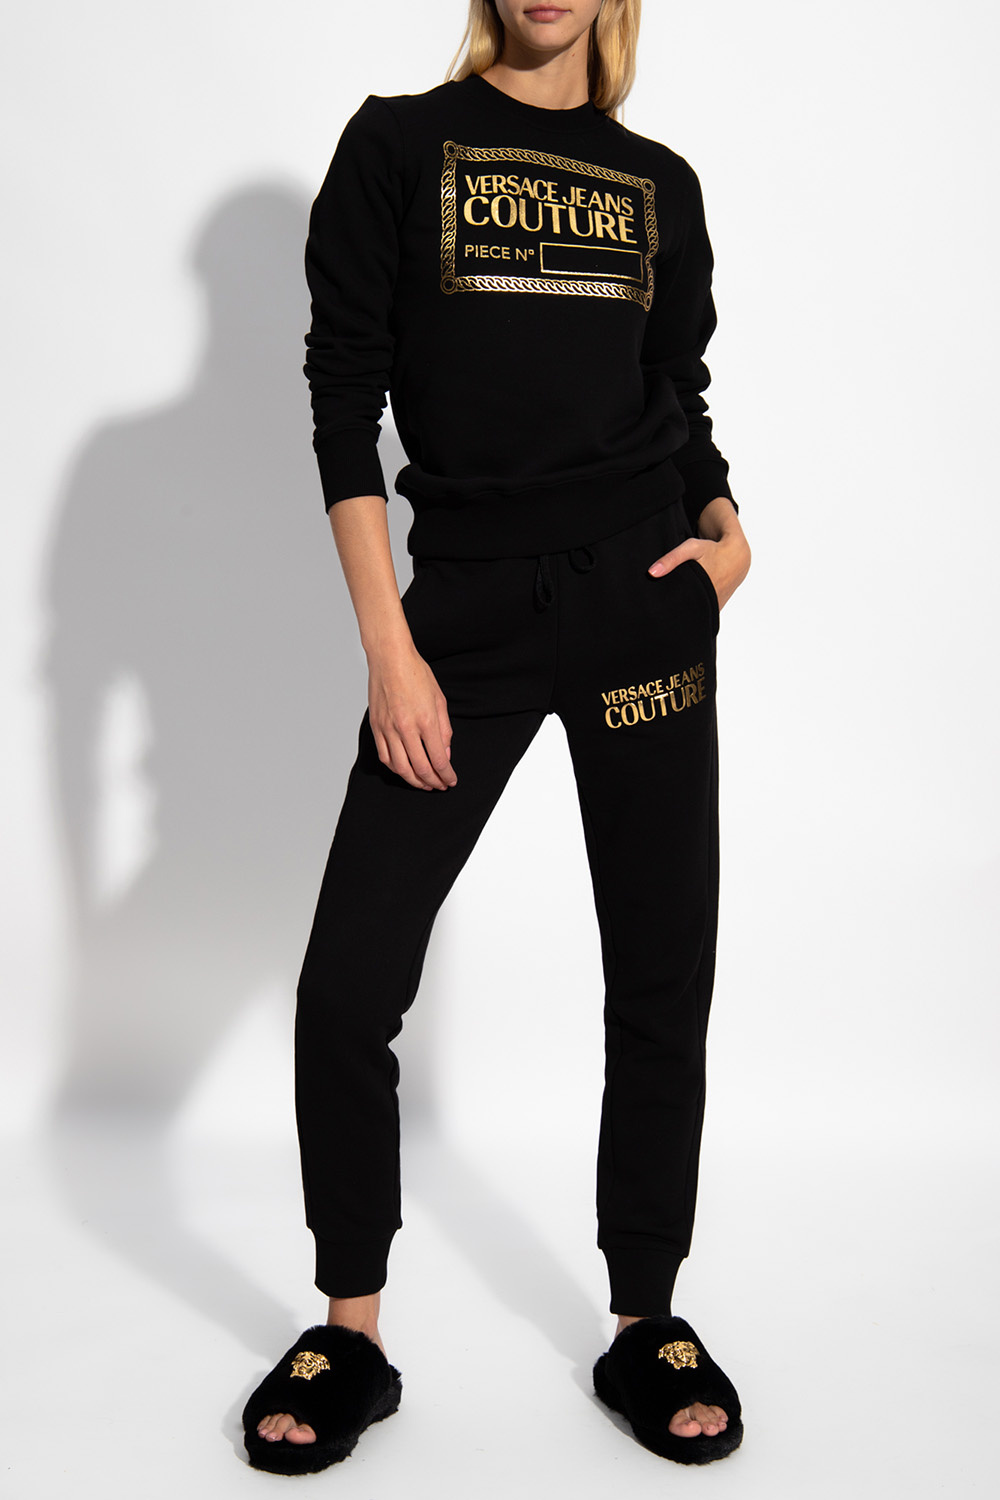 Versace Jeans Couture Puma Logo t-shirt in black